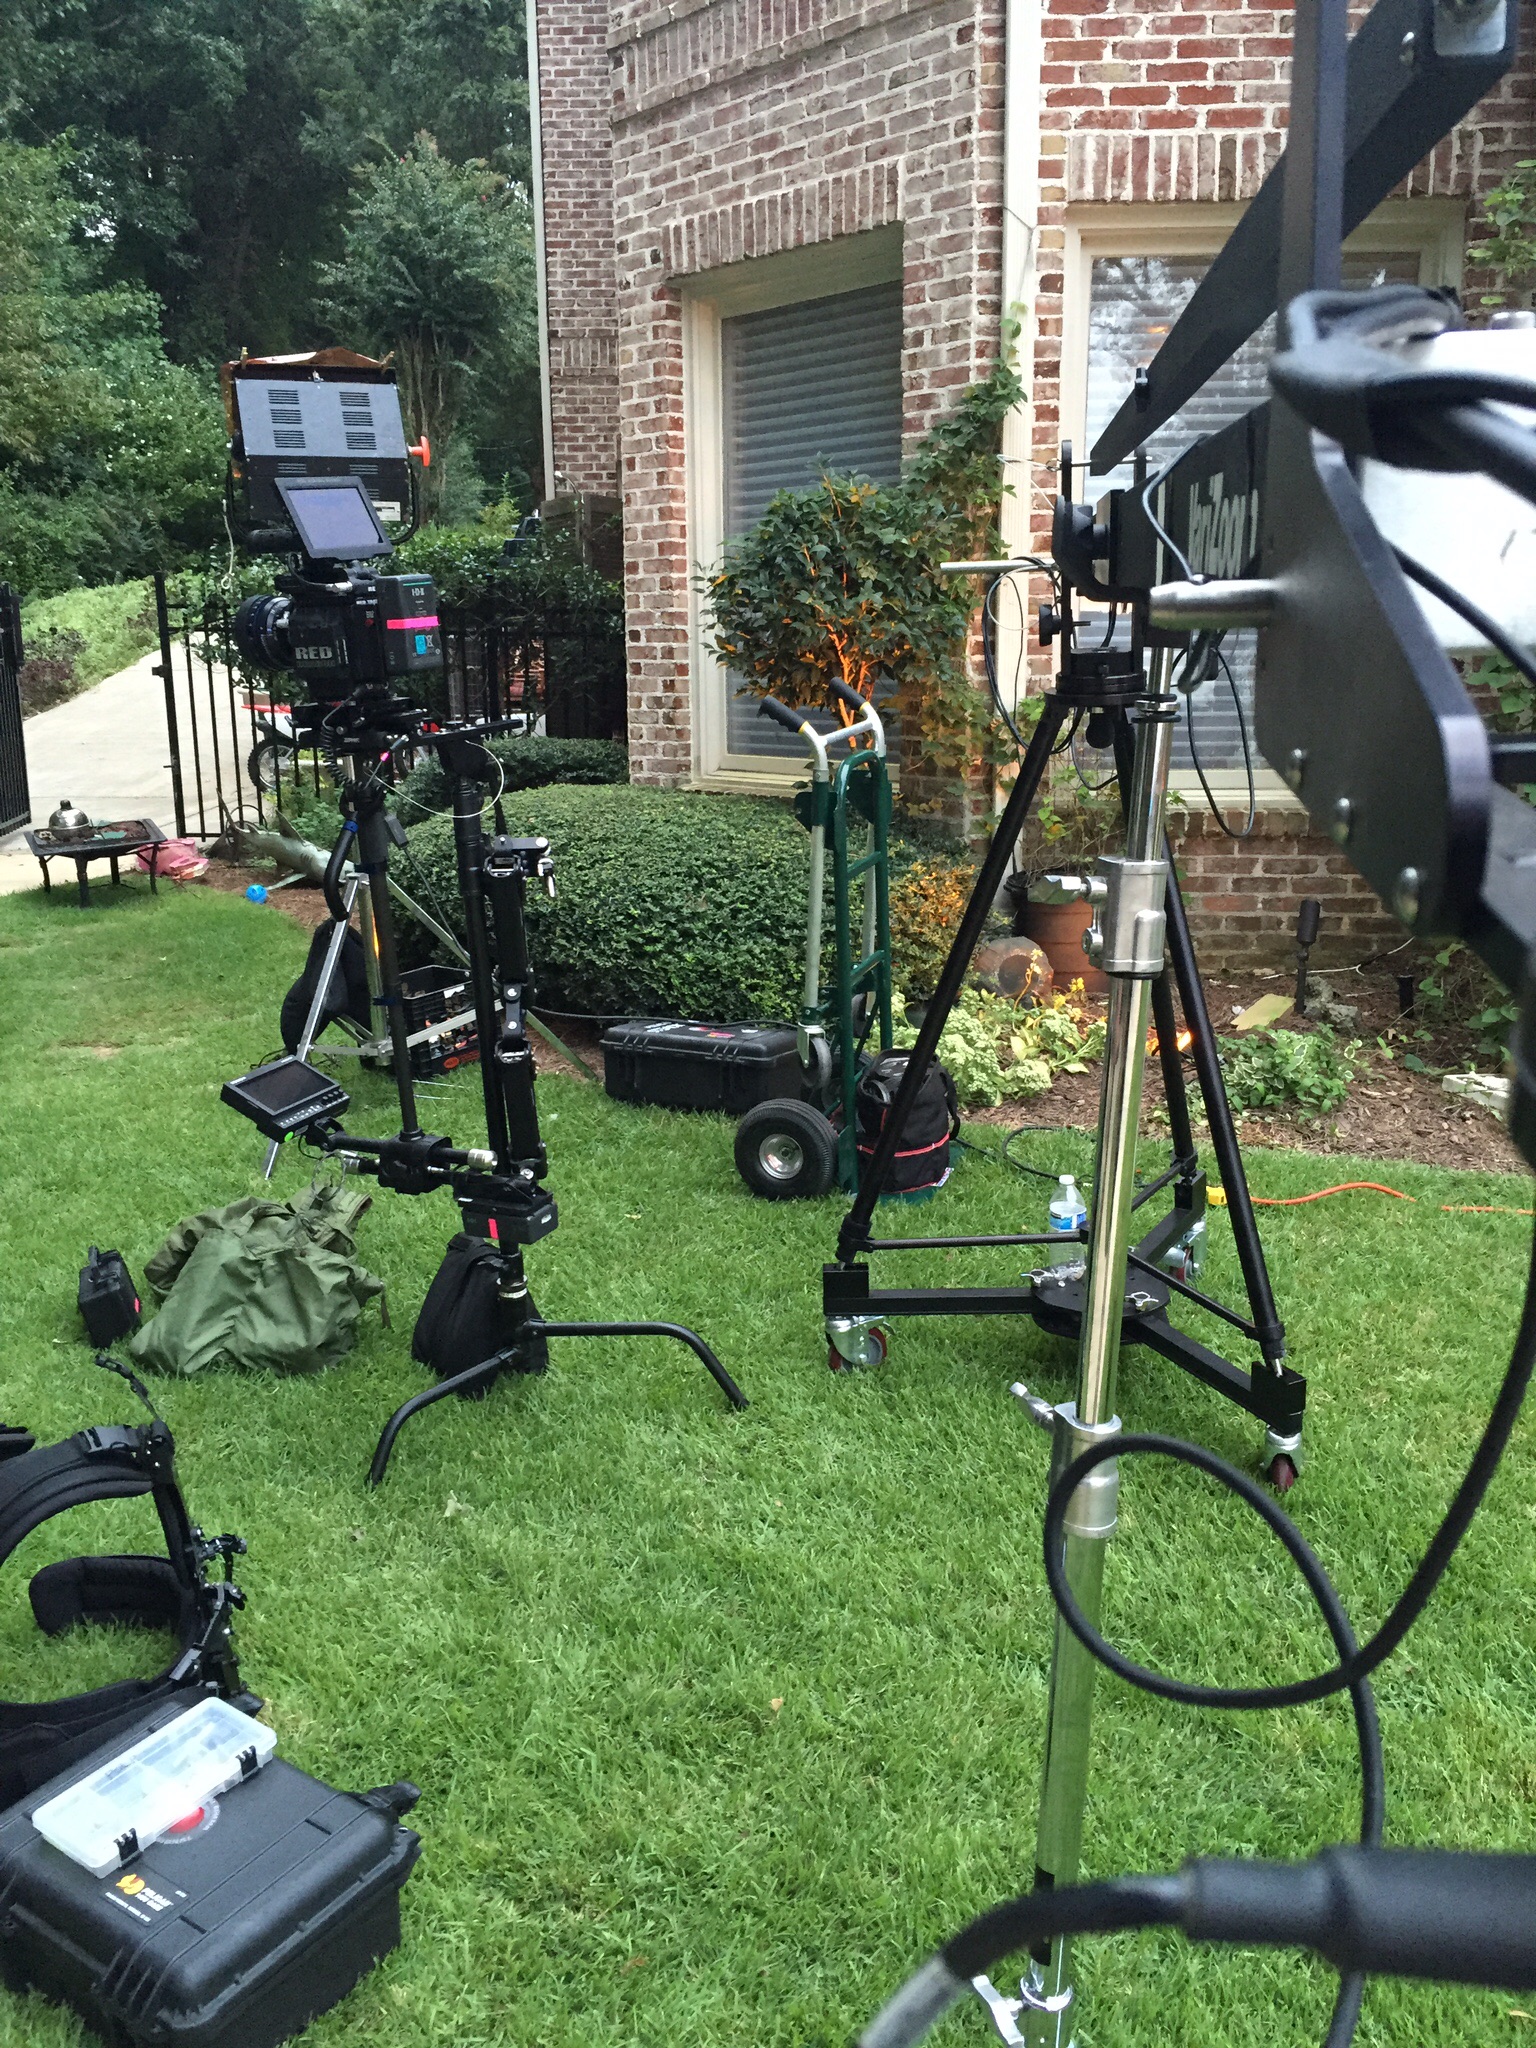 On set with all my equipment including Red Dragon, Steadicam, Matthews RdR dolly, Jib and more